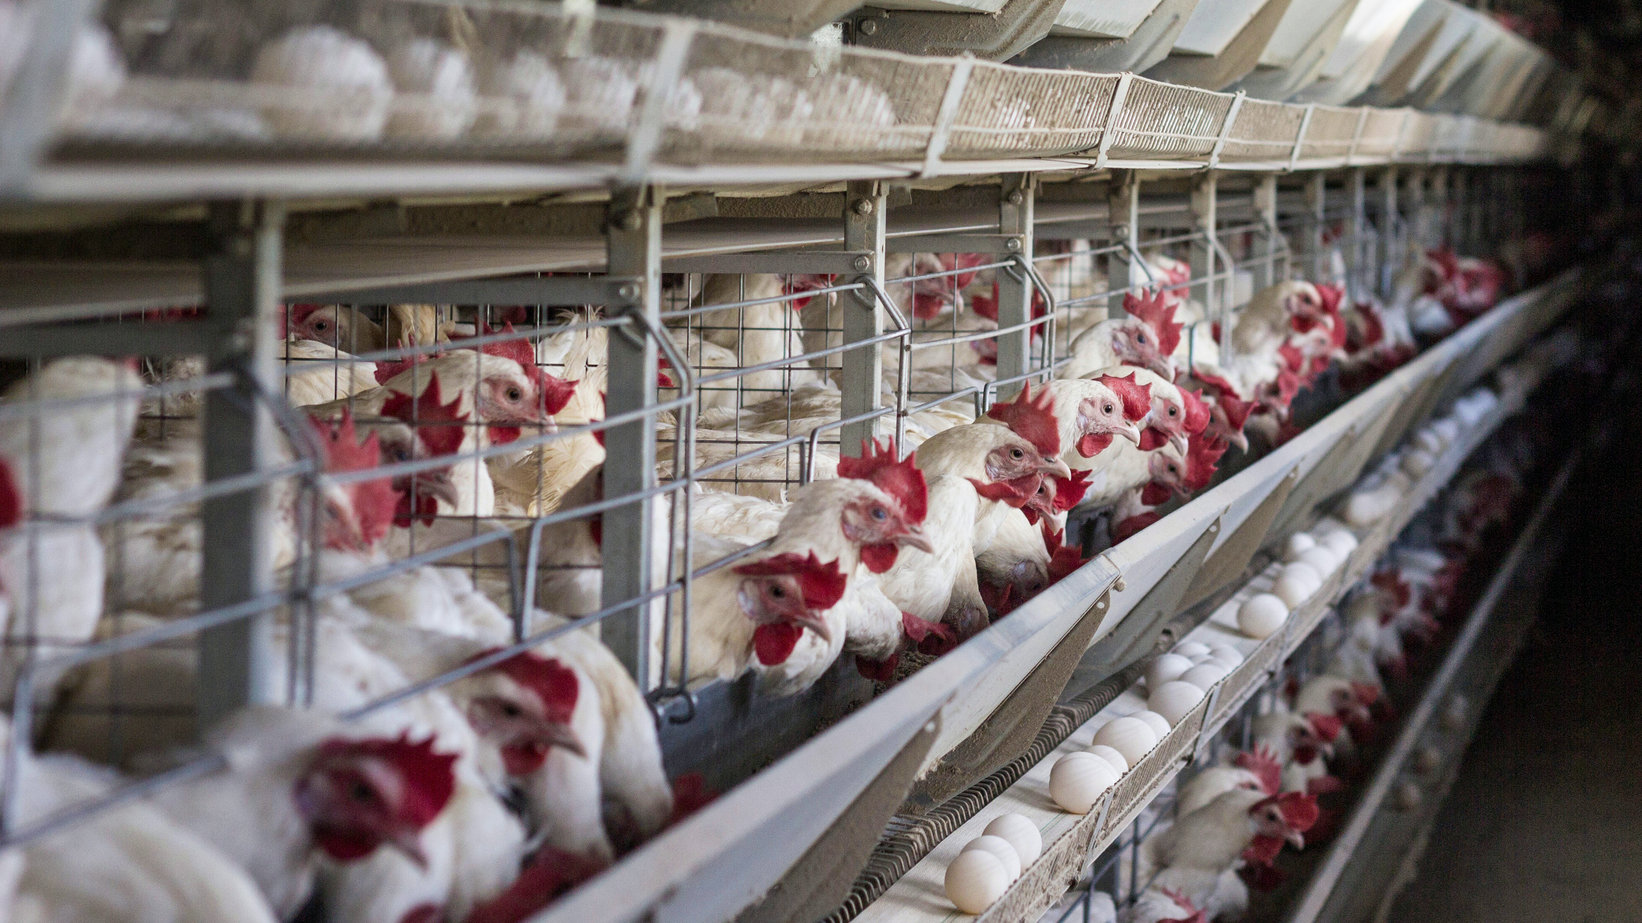 FDA Ordered to Release Factory Farming Data on Intense Confinement Hens  Used by the Egg Industry - Animal Legal Defense Fund